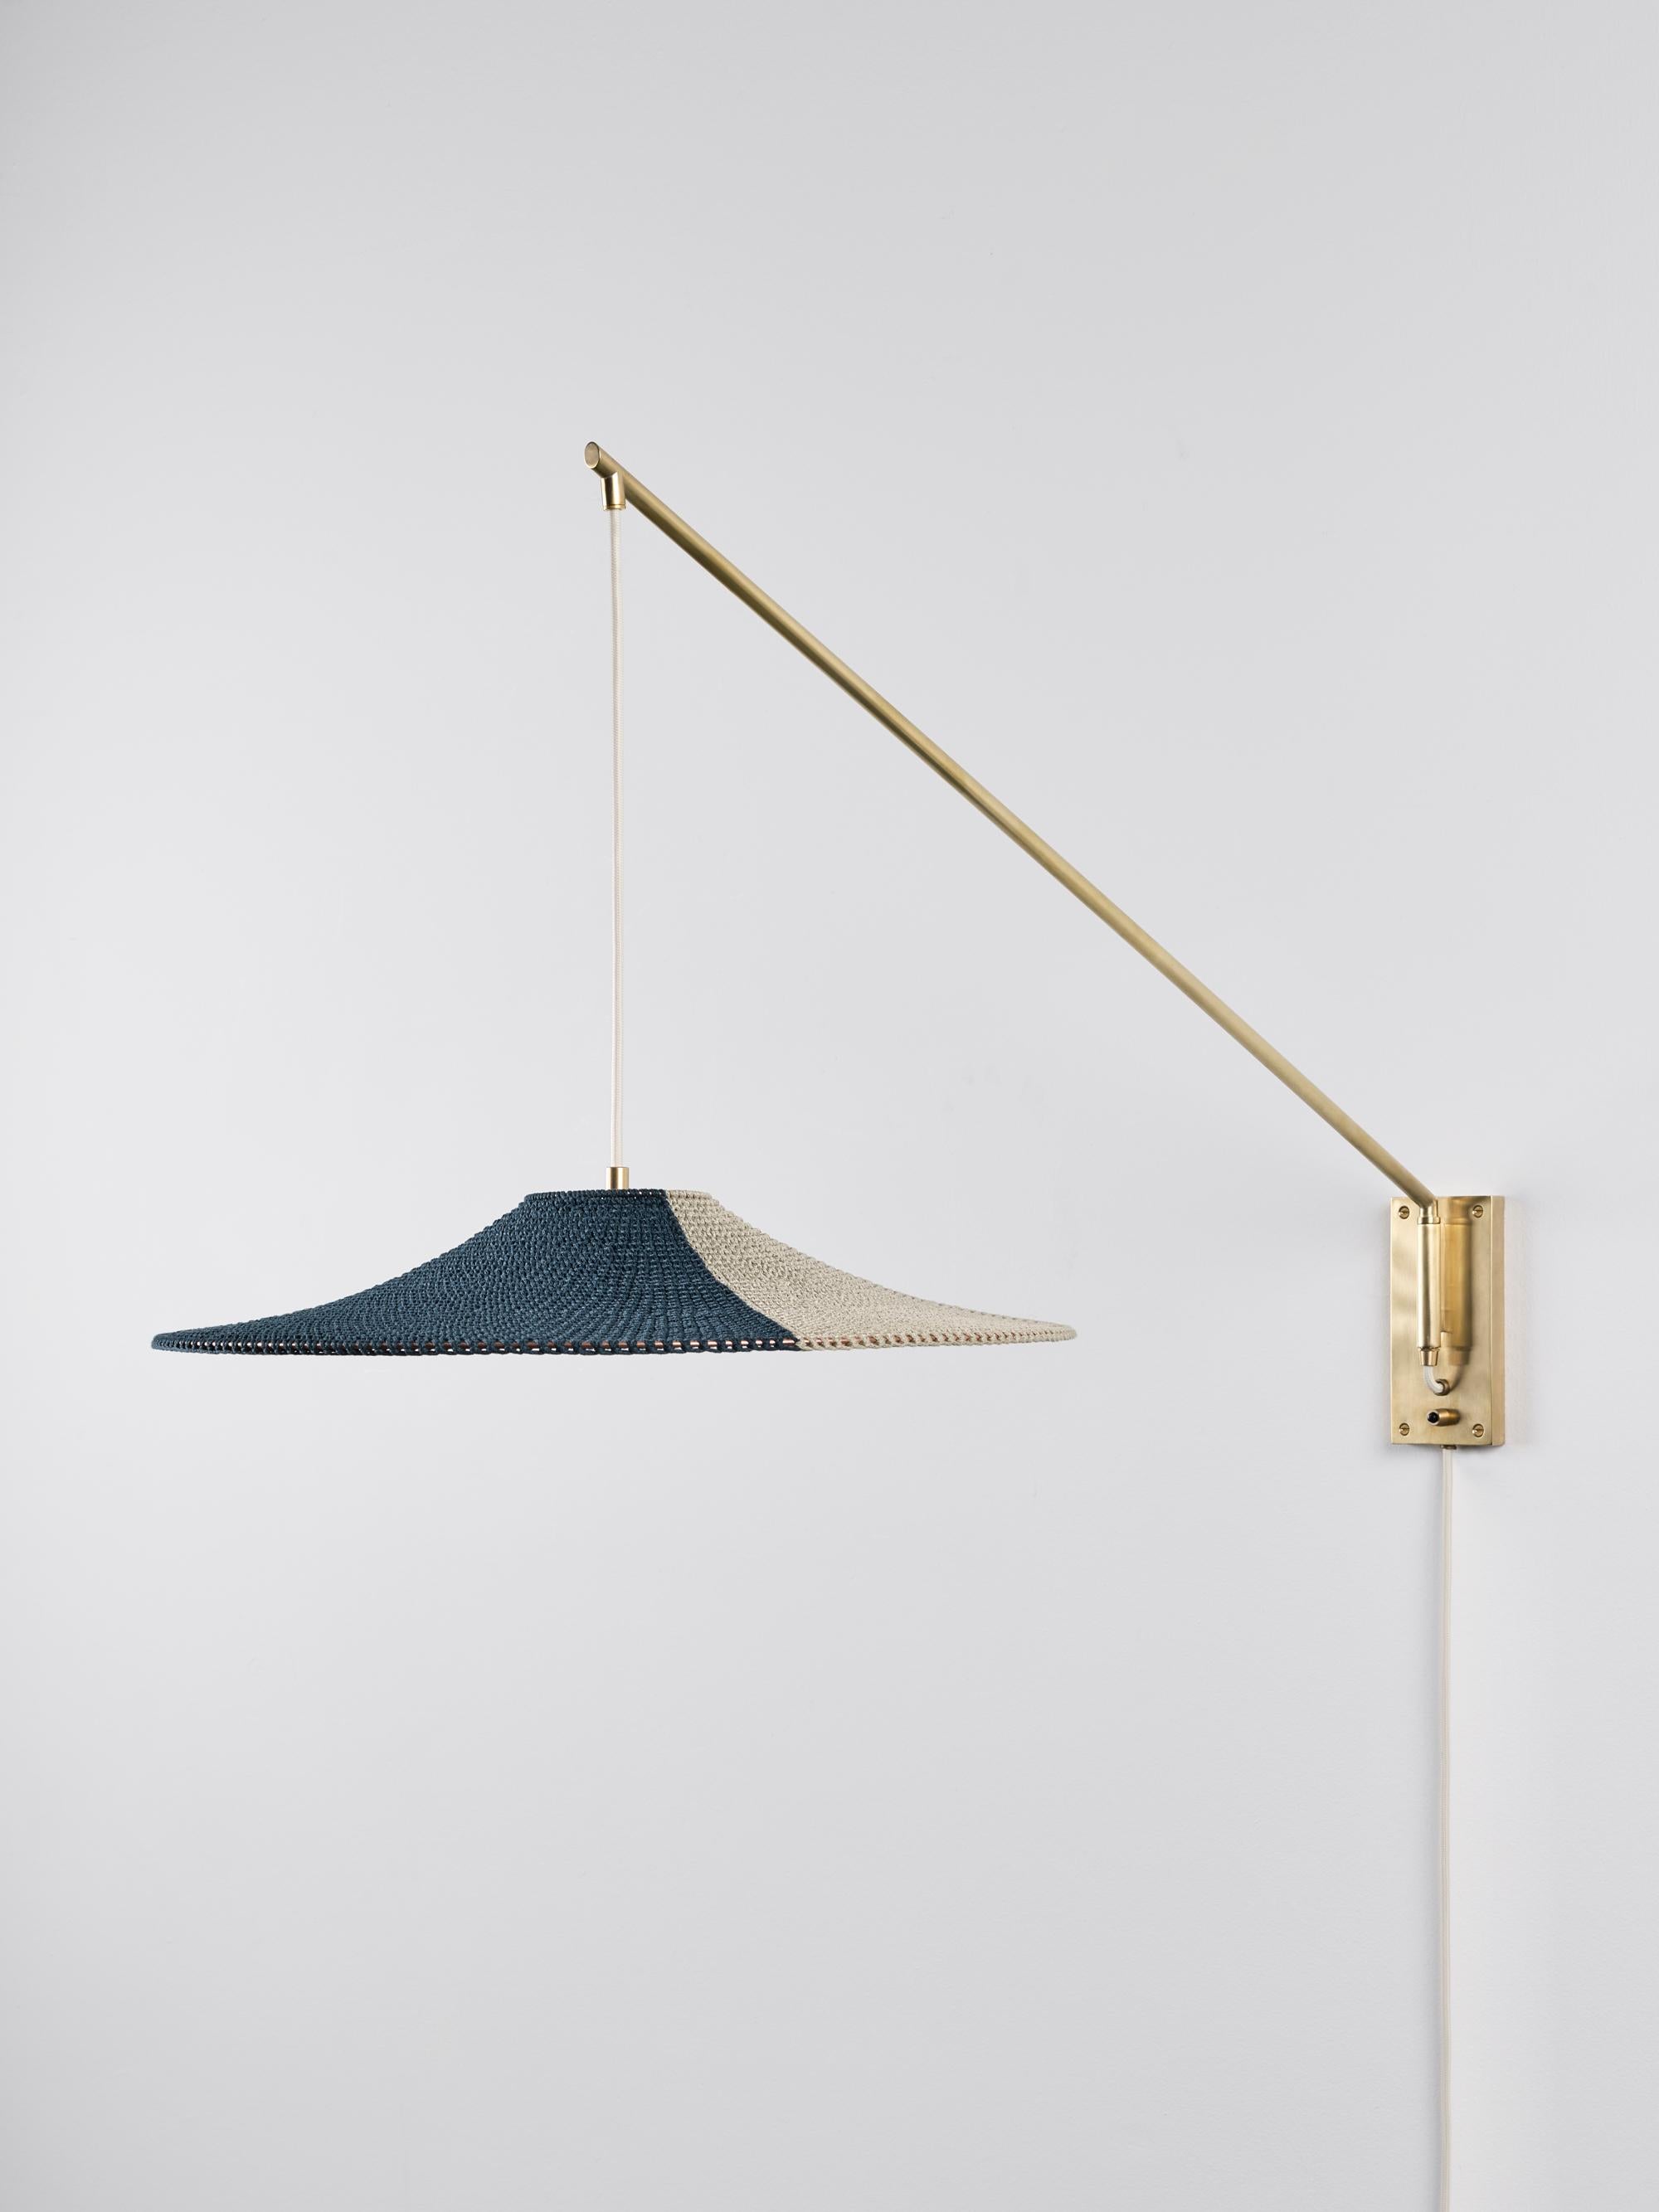 Large simple shade 01 50/50 wall lamp by Naomi Paul
Dimensions: D 50 x W 102 x H 58 cm
Materials: Metal frame, Egyptian cotton cord.
Colors: Deepsea and Putty.
Available in other colors and in 2 sizes: D 30 x W 50, D50 x W 102 cm.
Available in